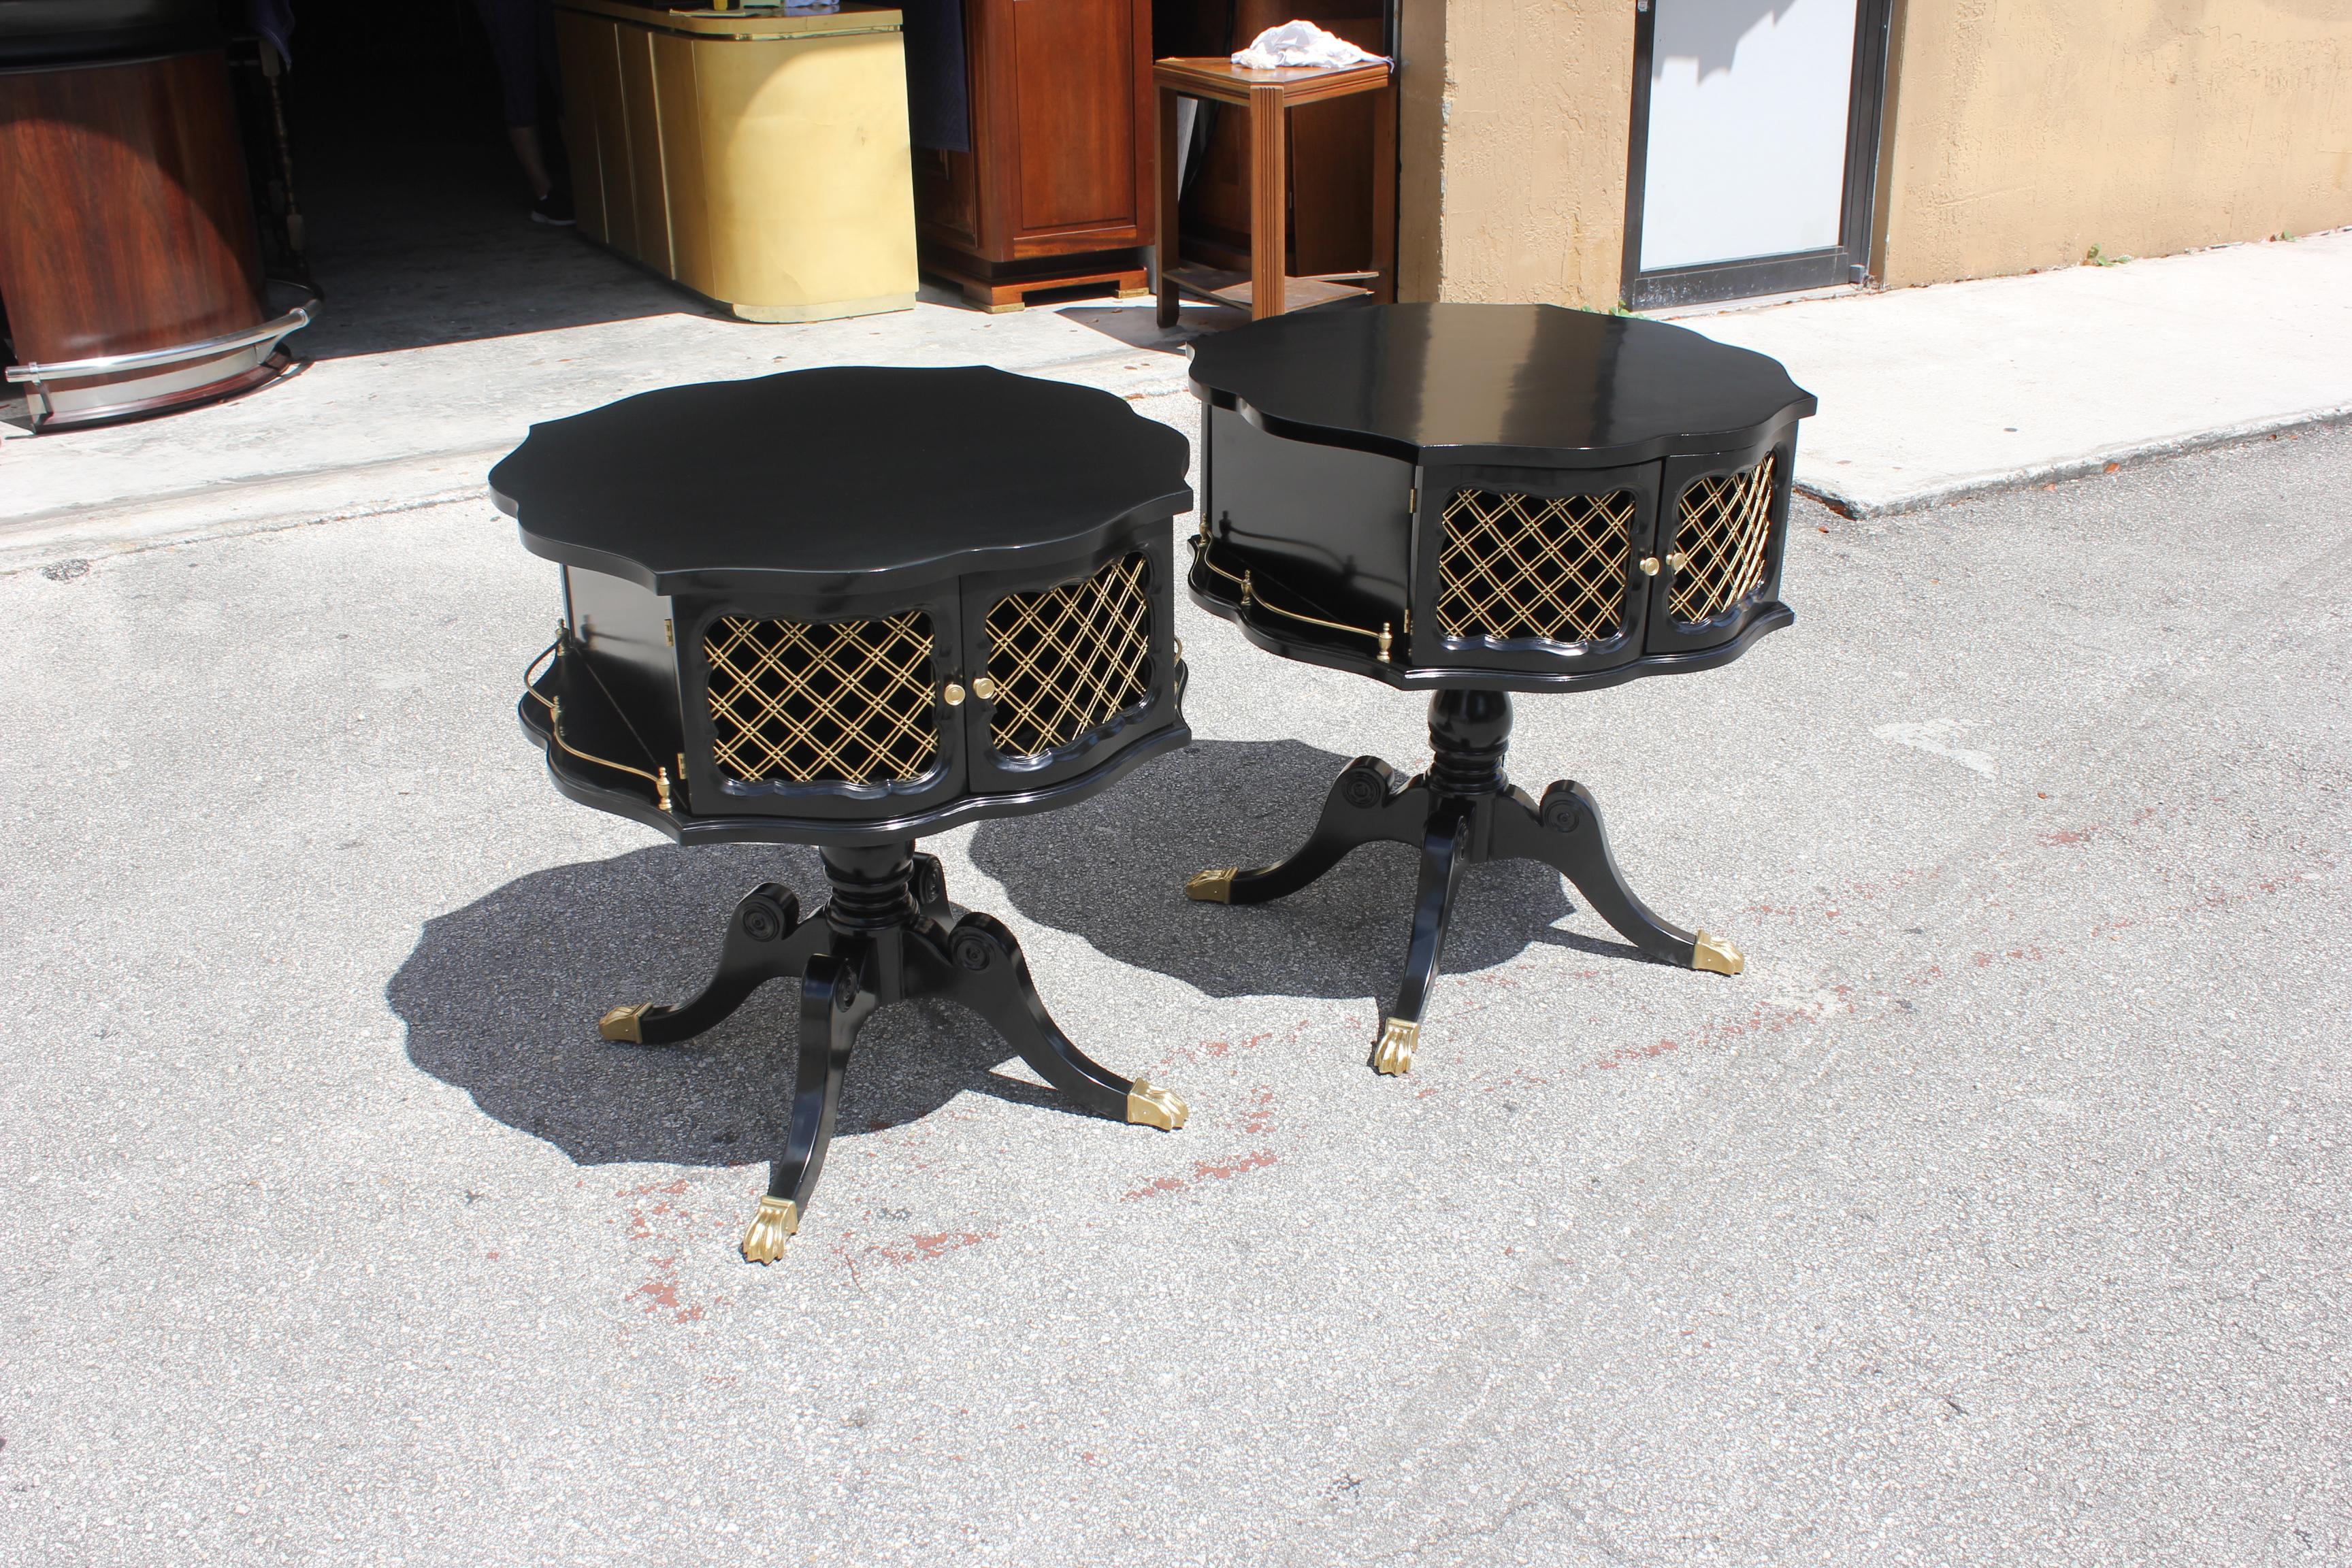 Fine Pair of French neoclassical side table or accent table, circa 1920s fine pair of French neoclassical side table or accent table, circa 1920s. Made of mahogany, the mahogany wood has been ebonized and finished with a French polished high luster,